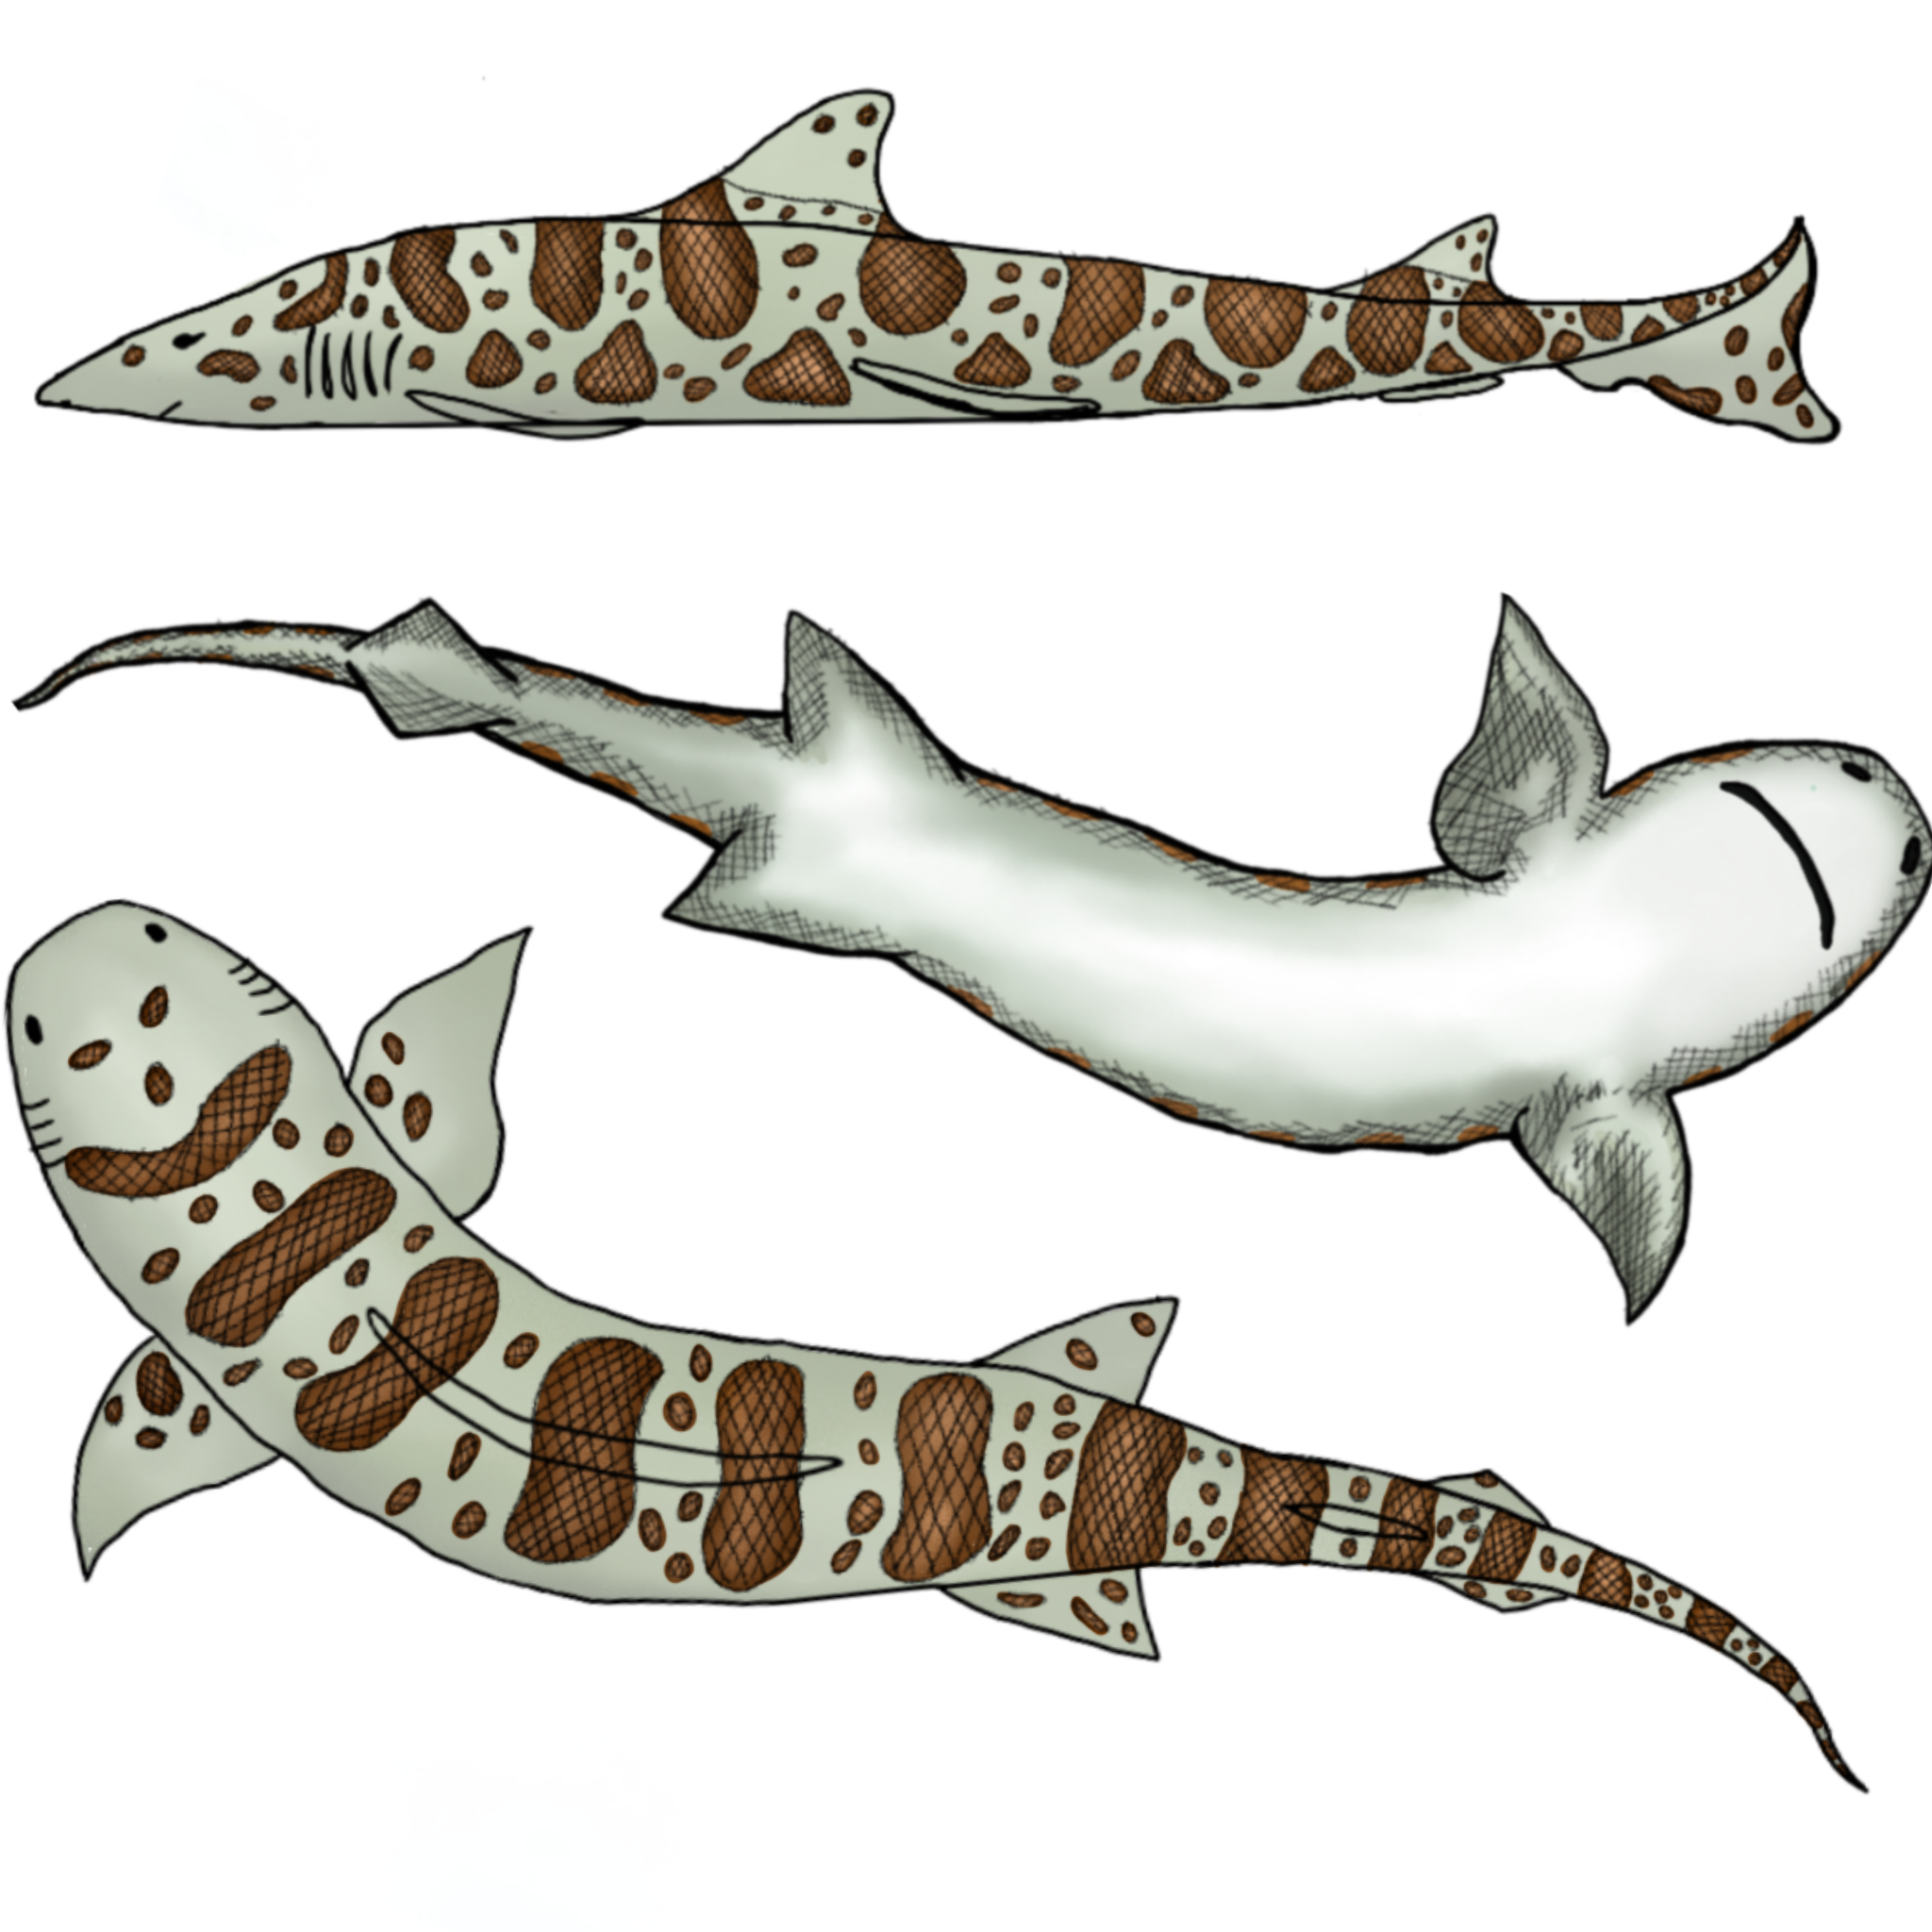 Drawing of a leopard shark from multiple perspectives one shows it from the top one is from the side and the last one is from the bottom. The shark has a light brown coloration and dark brown stripes and dots on the top and sides of it but its bottom is white